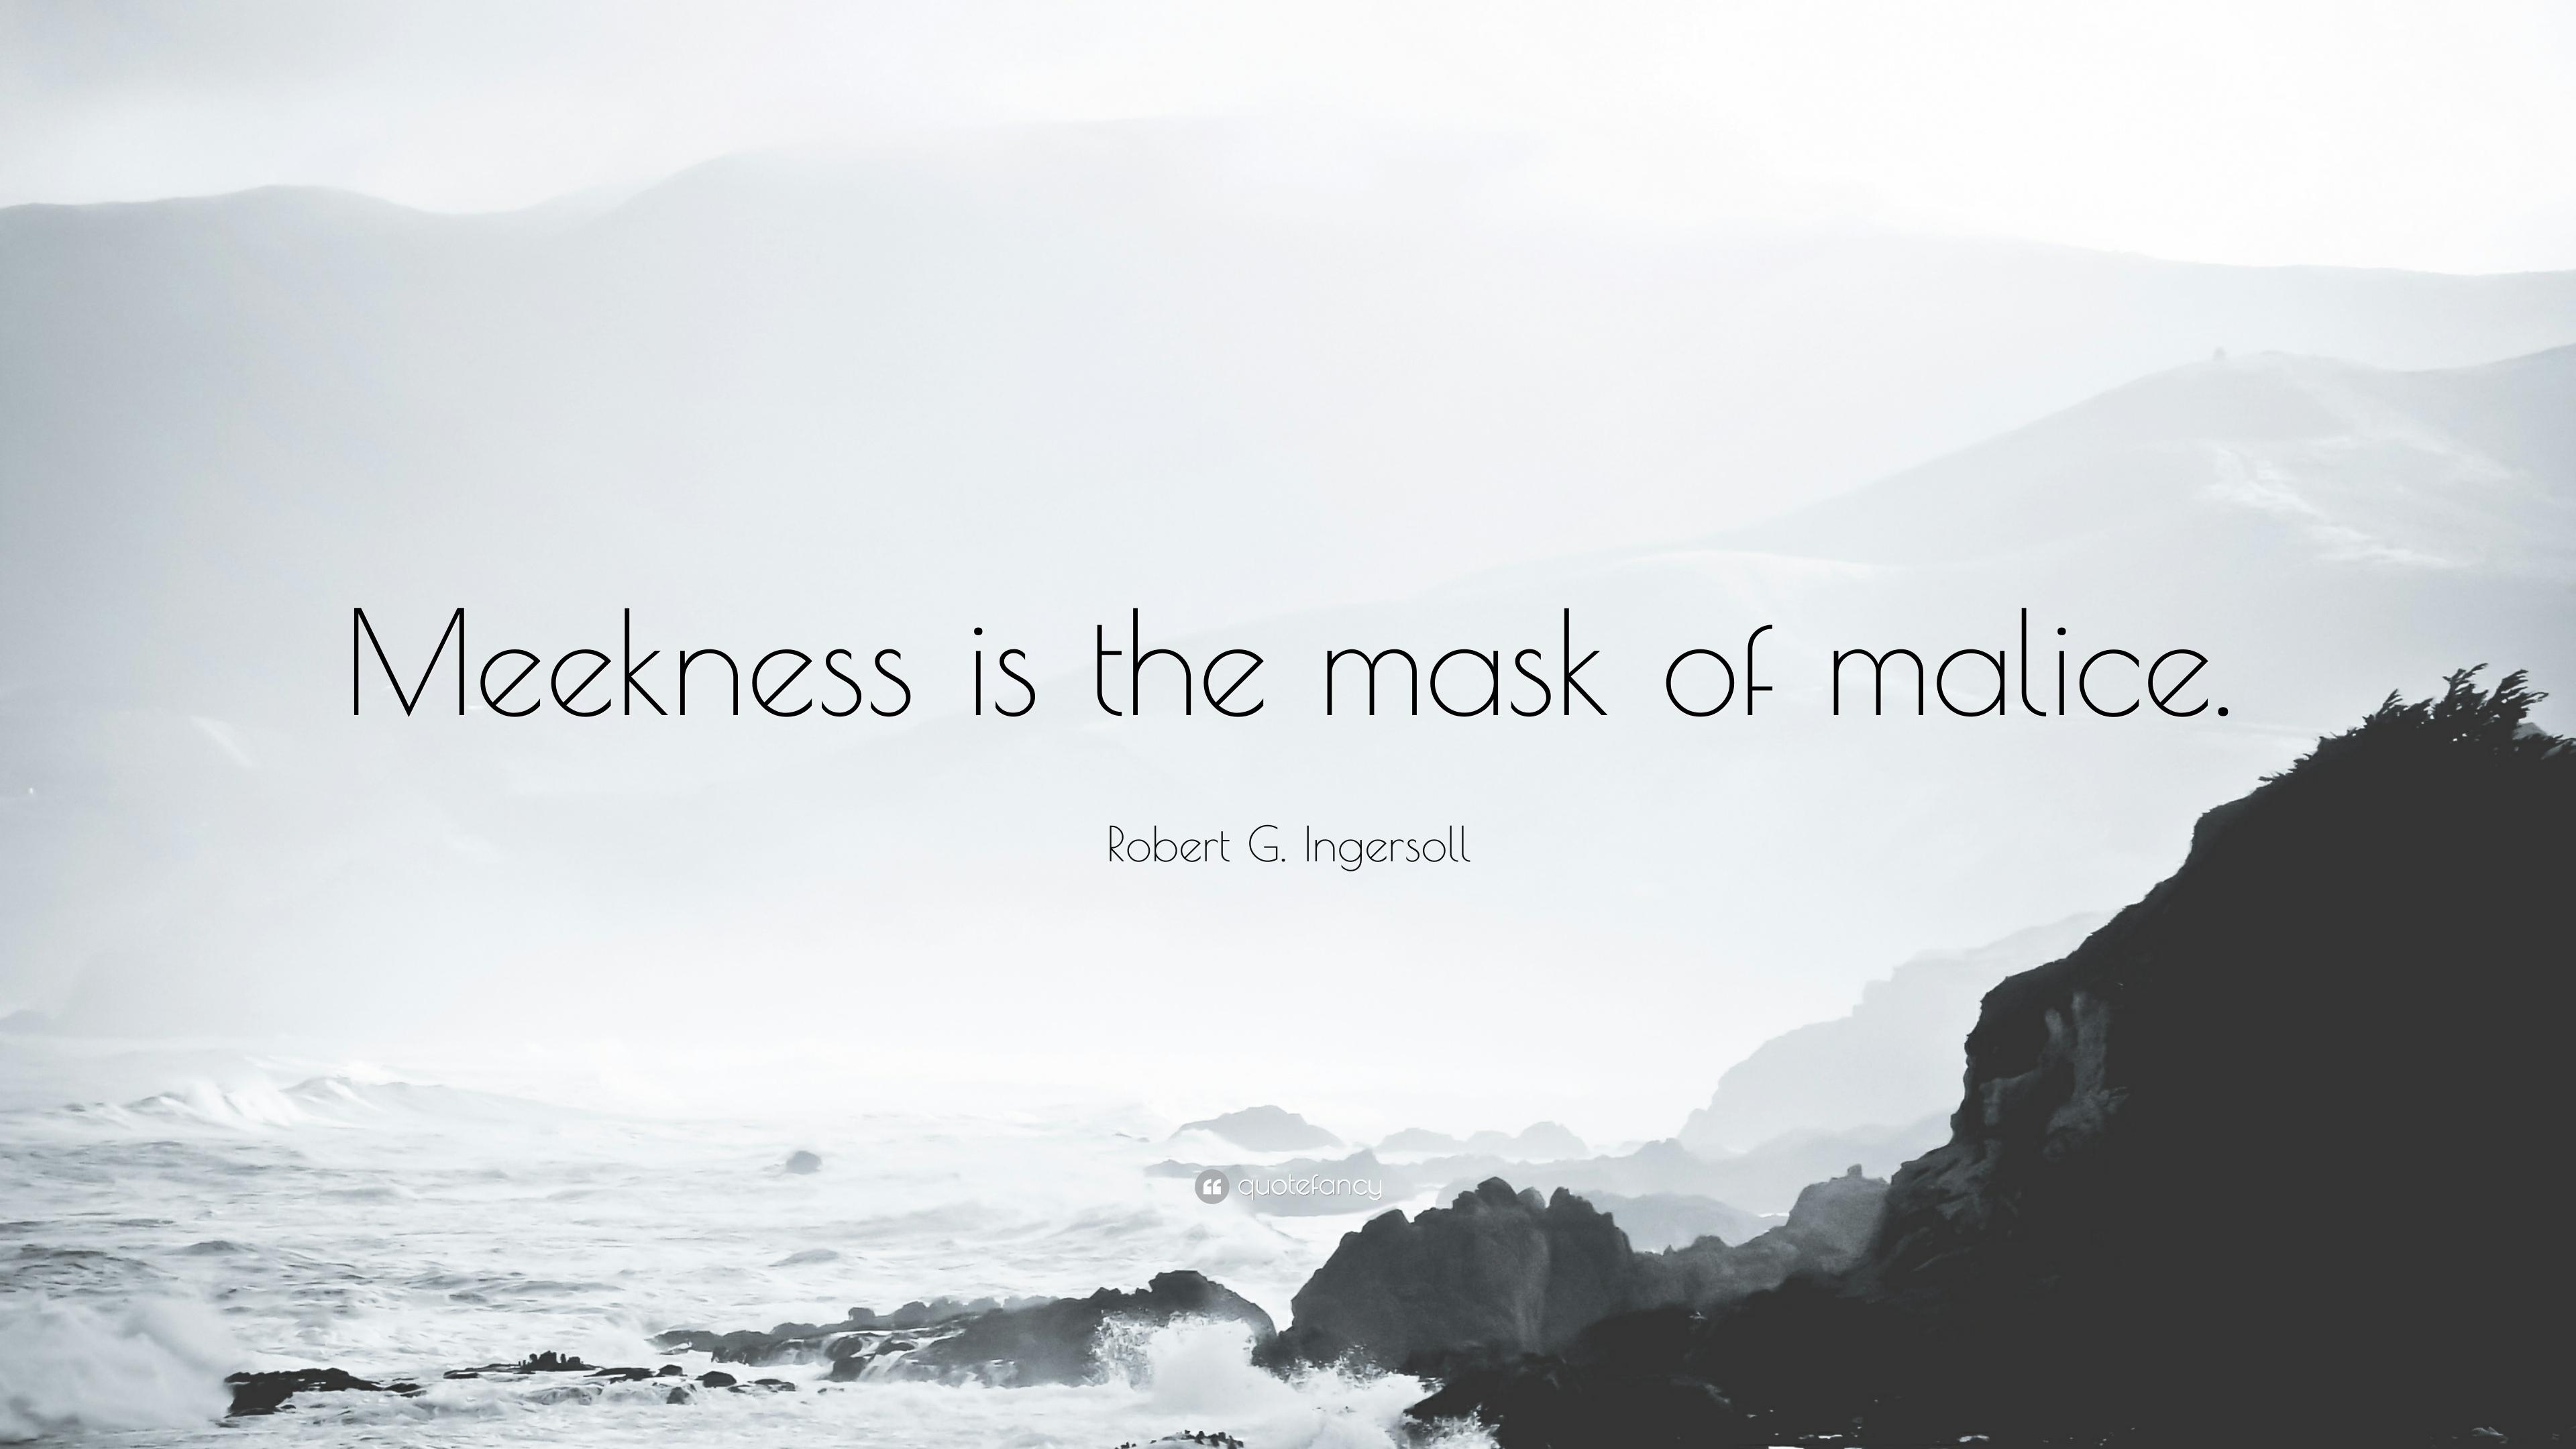 Robert G. Ingersoll Quote: “Meekness is the mask of malice.” 9